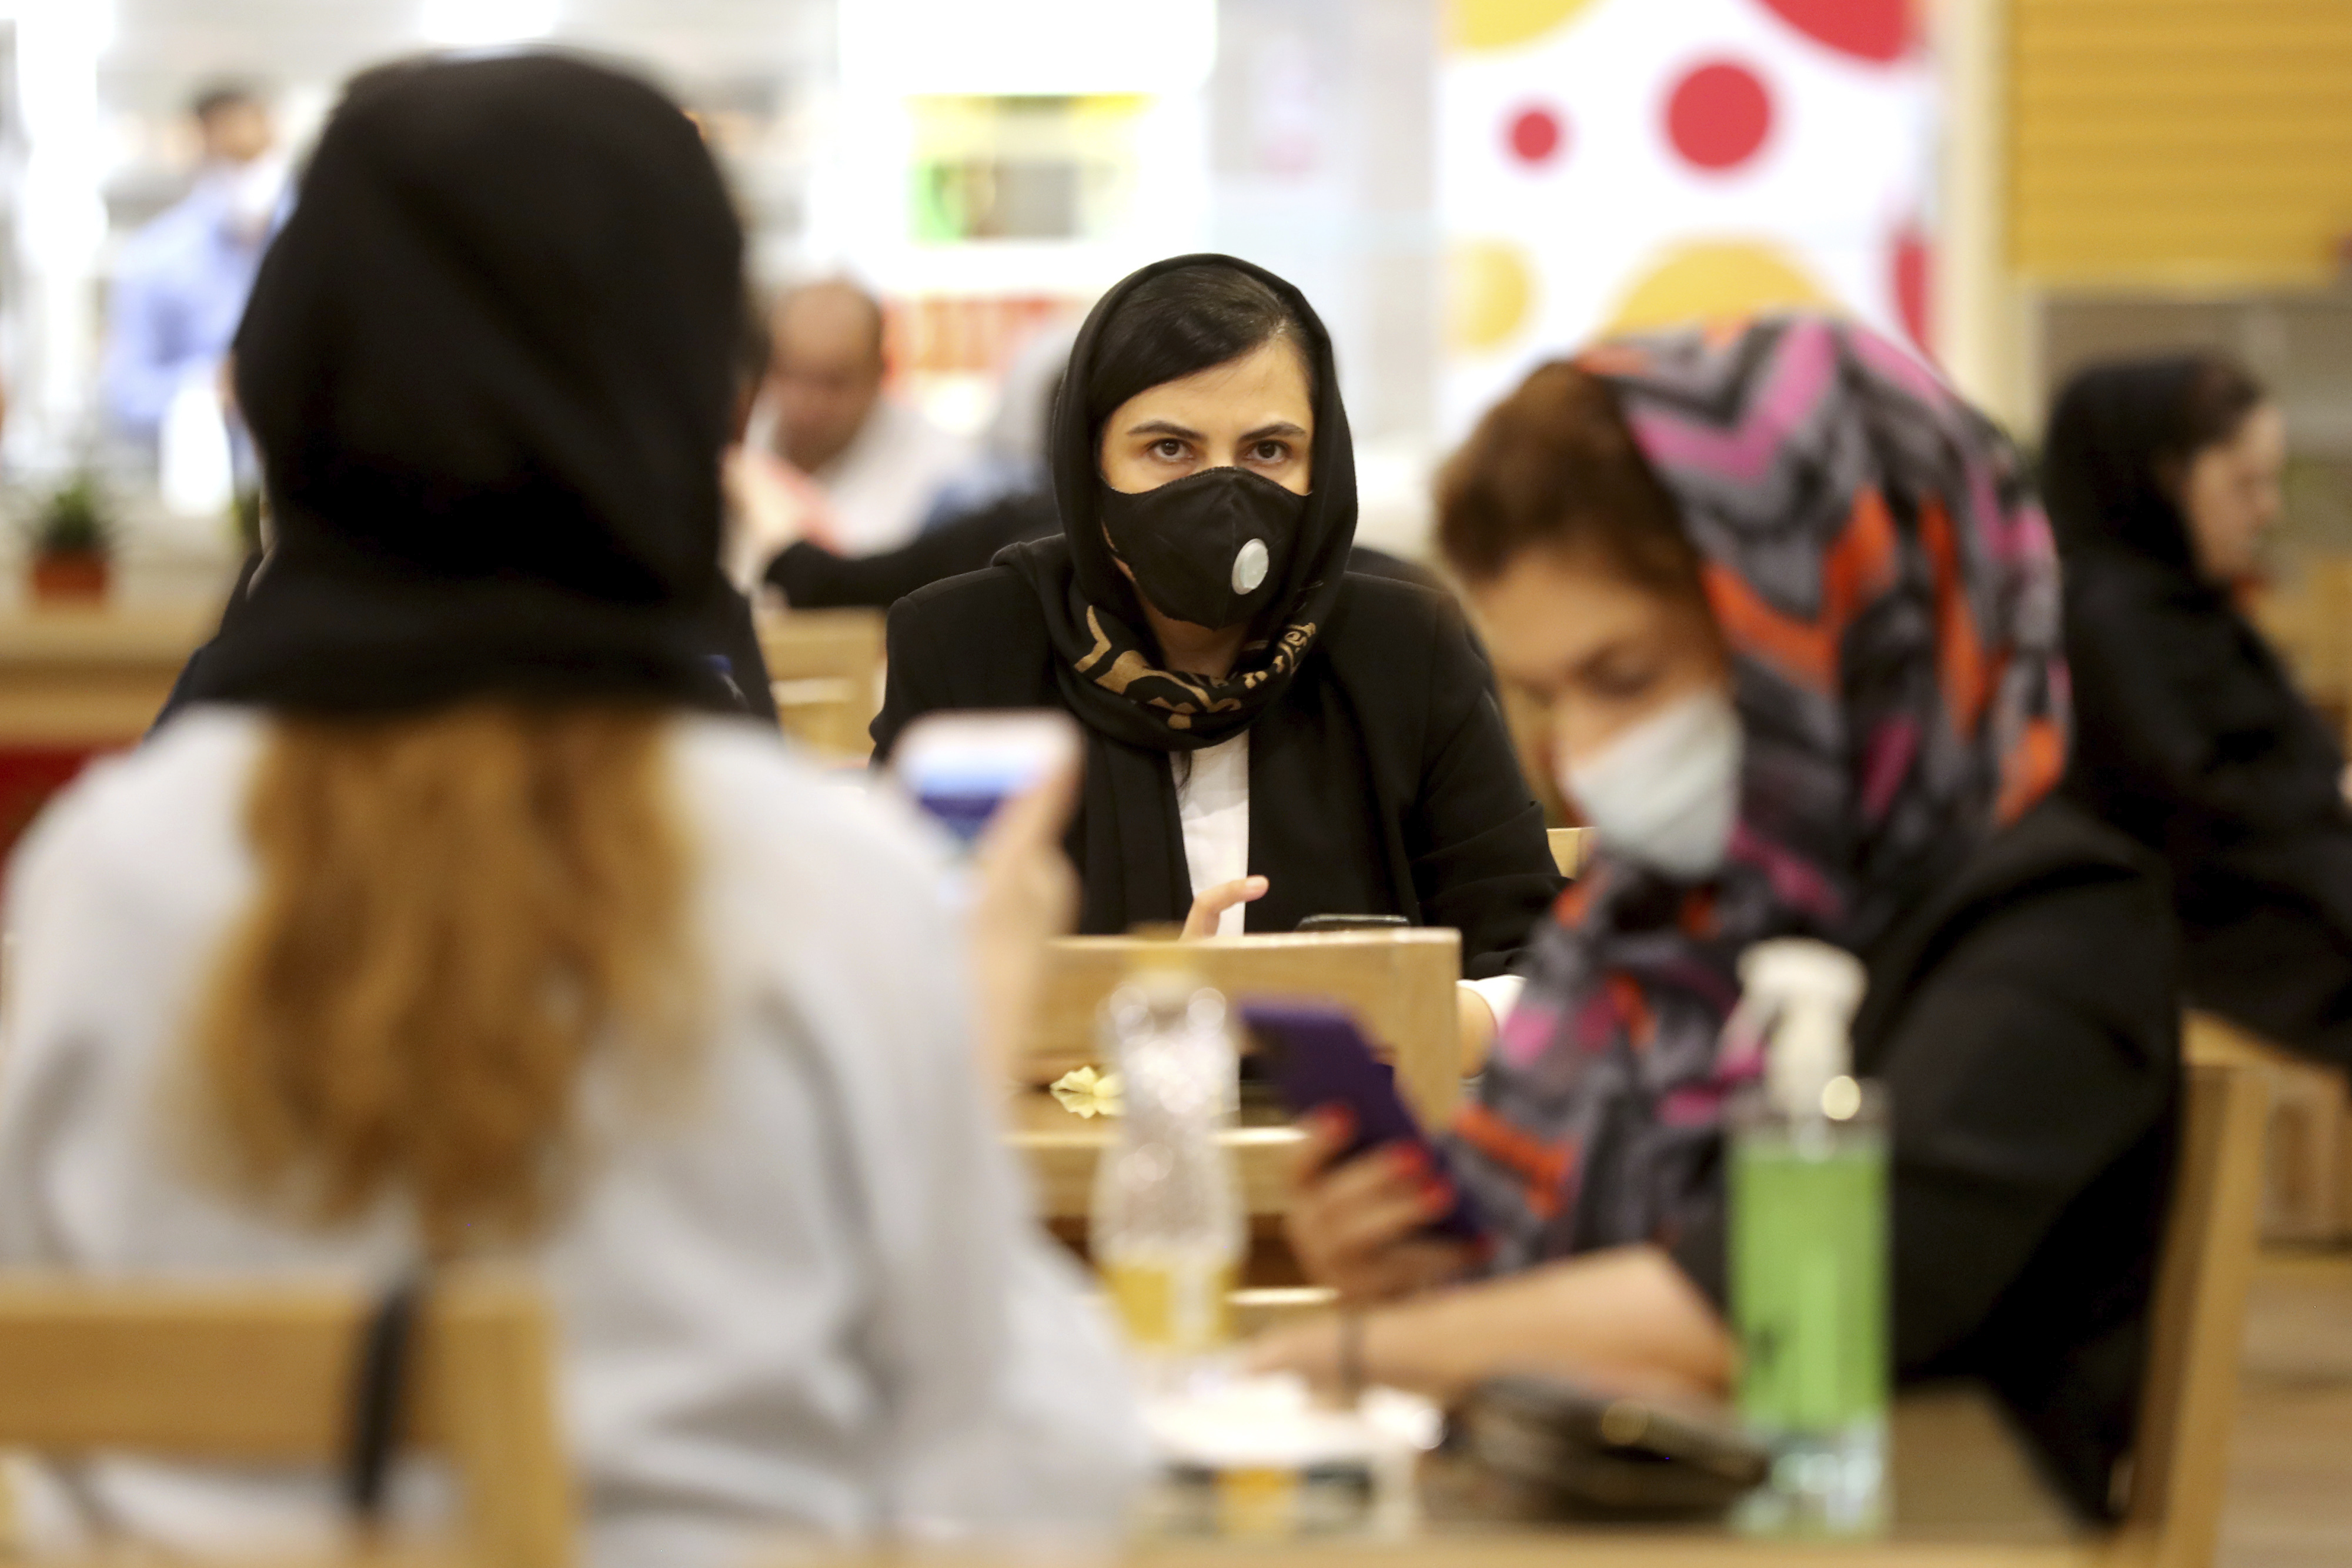 Women wearing protective face masks to help prevent spread of the coronavirus sit at a shopping center food court, in Tehran, Iran, Wednesday, Aug. 19, 2020. Iran surpassed 20,000 confirmed deaths from the coronavirus on Wednesday, the health ministry said — the highest death toll for any Middle East country so far in the pandemic. (AP Photo/Ebrahim Noroozi)